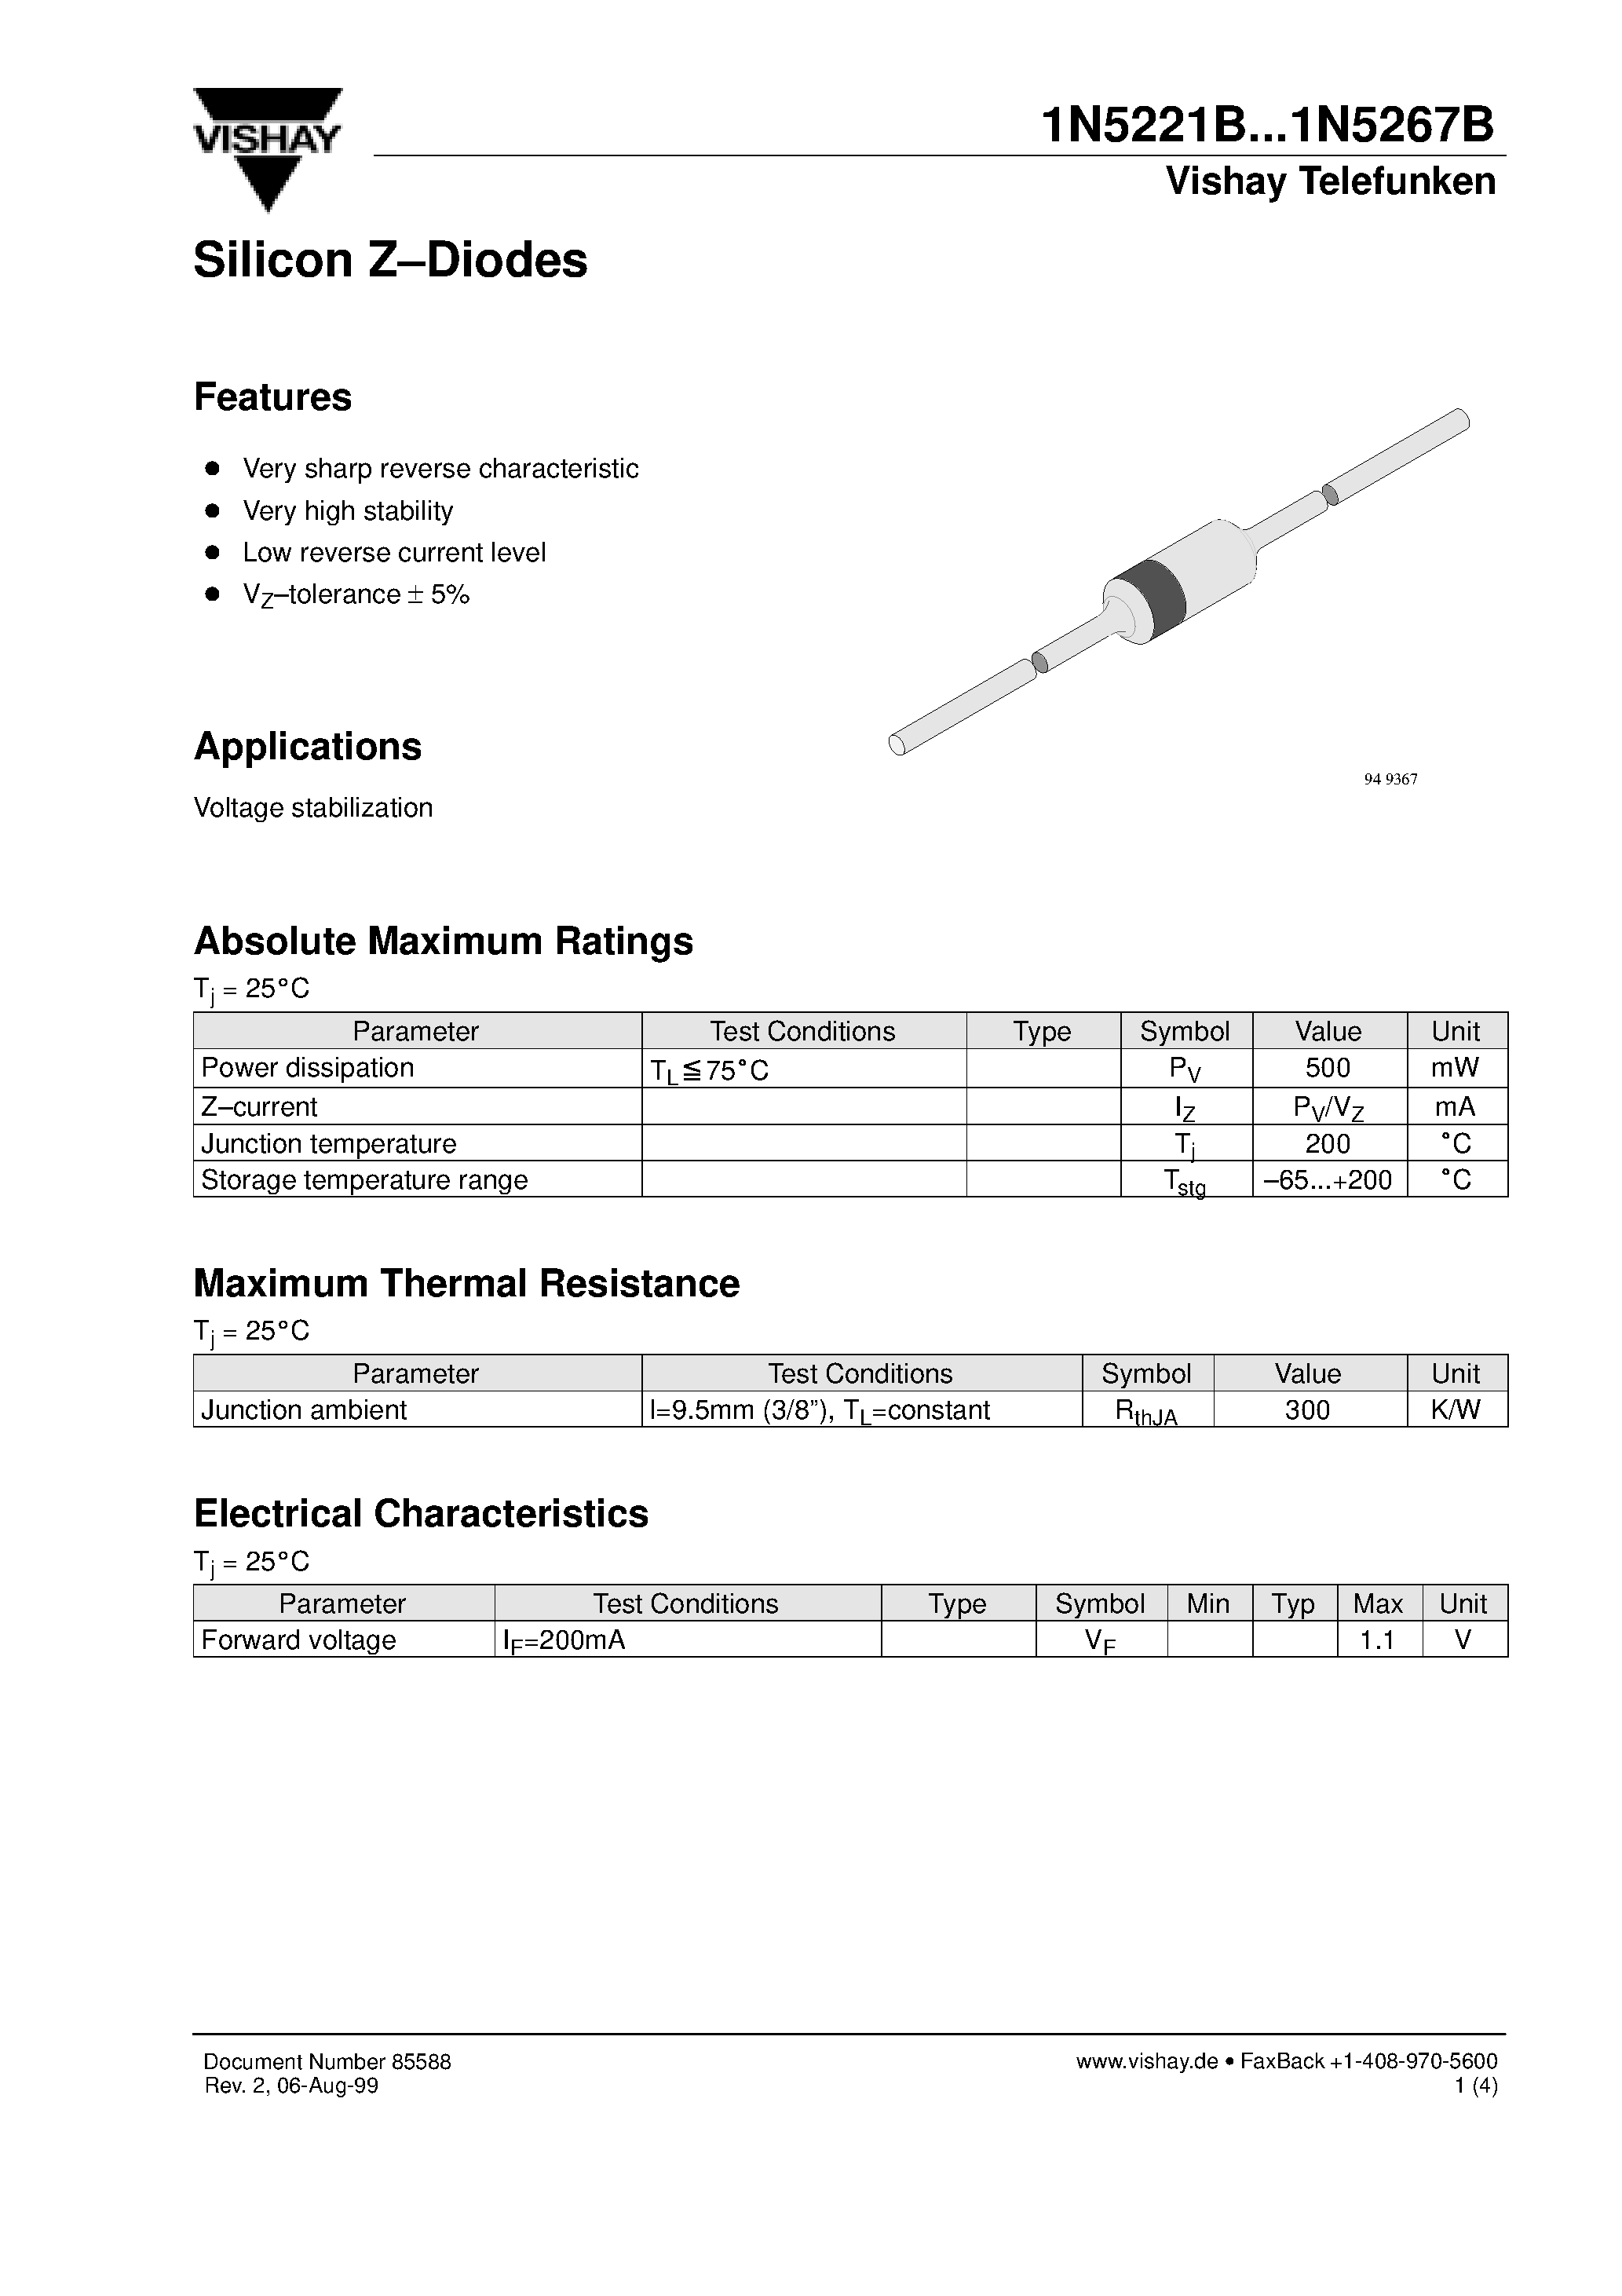 Datasheet 1N5262B - Silicon Z-Diodes page 1